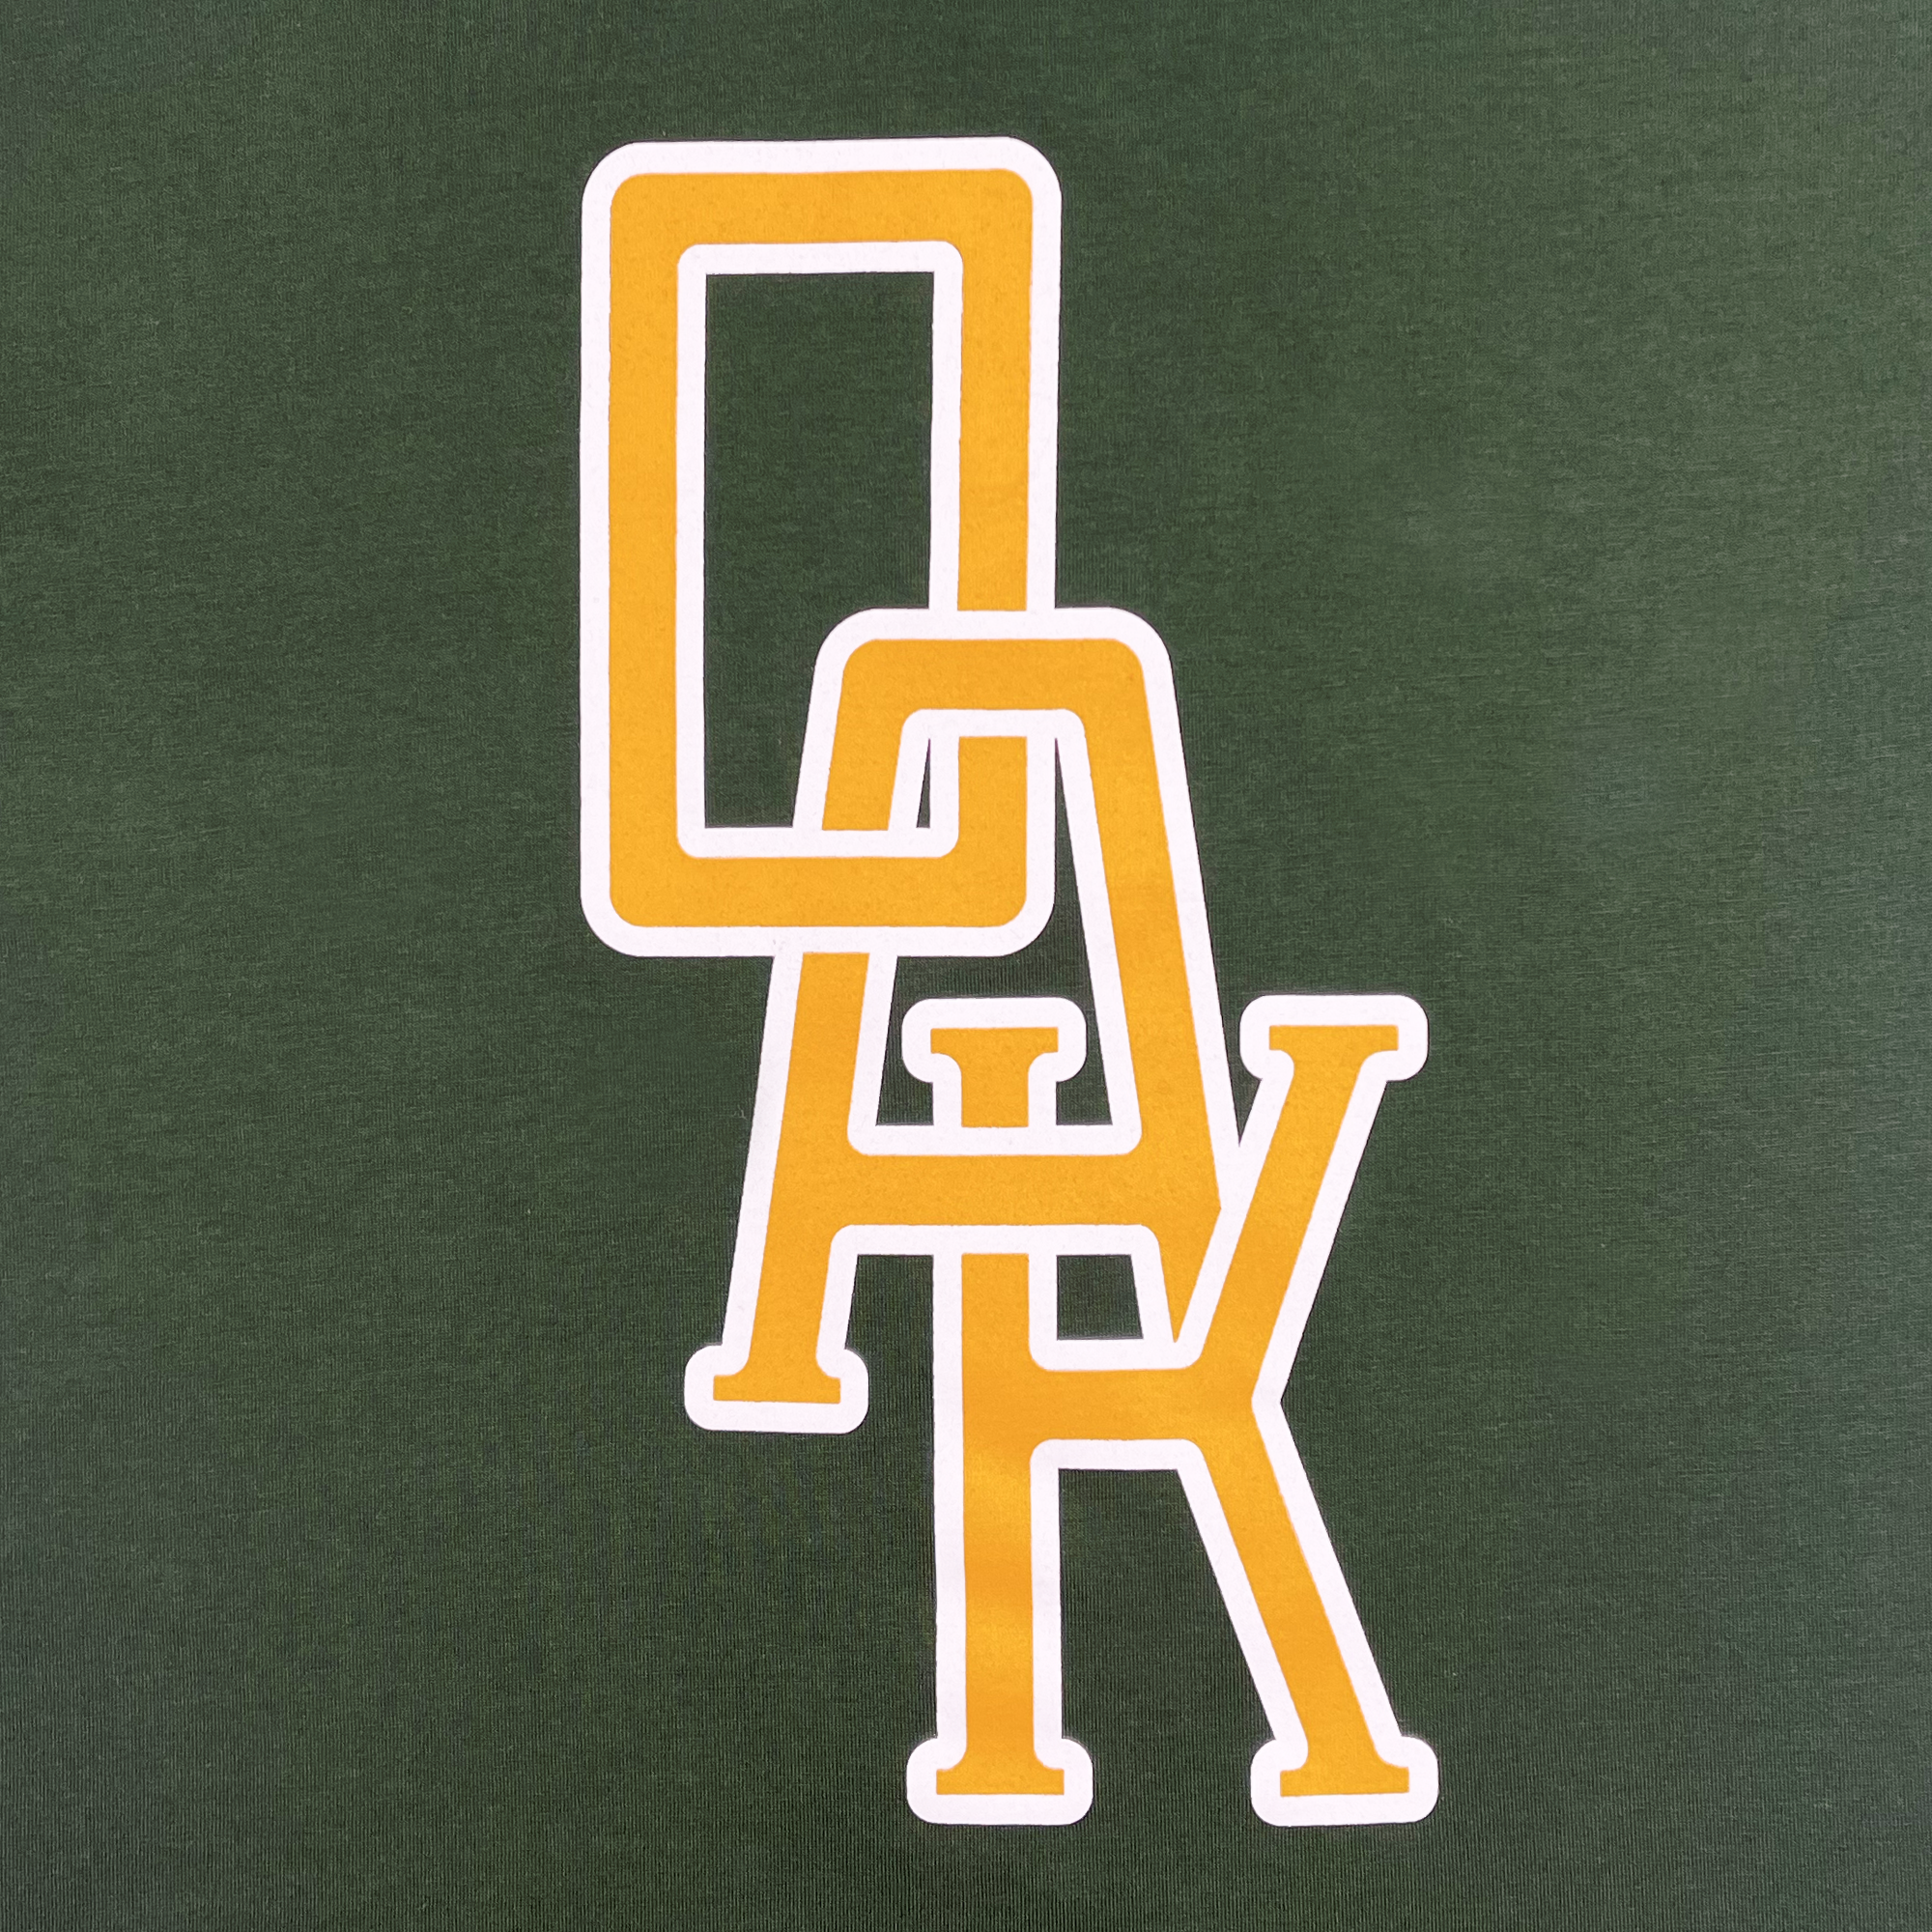 Detailed view of a forest green t-shirt with OAK monogram design centered in yellow and white.